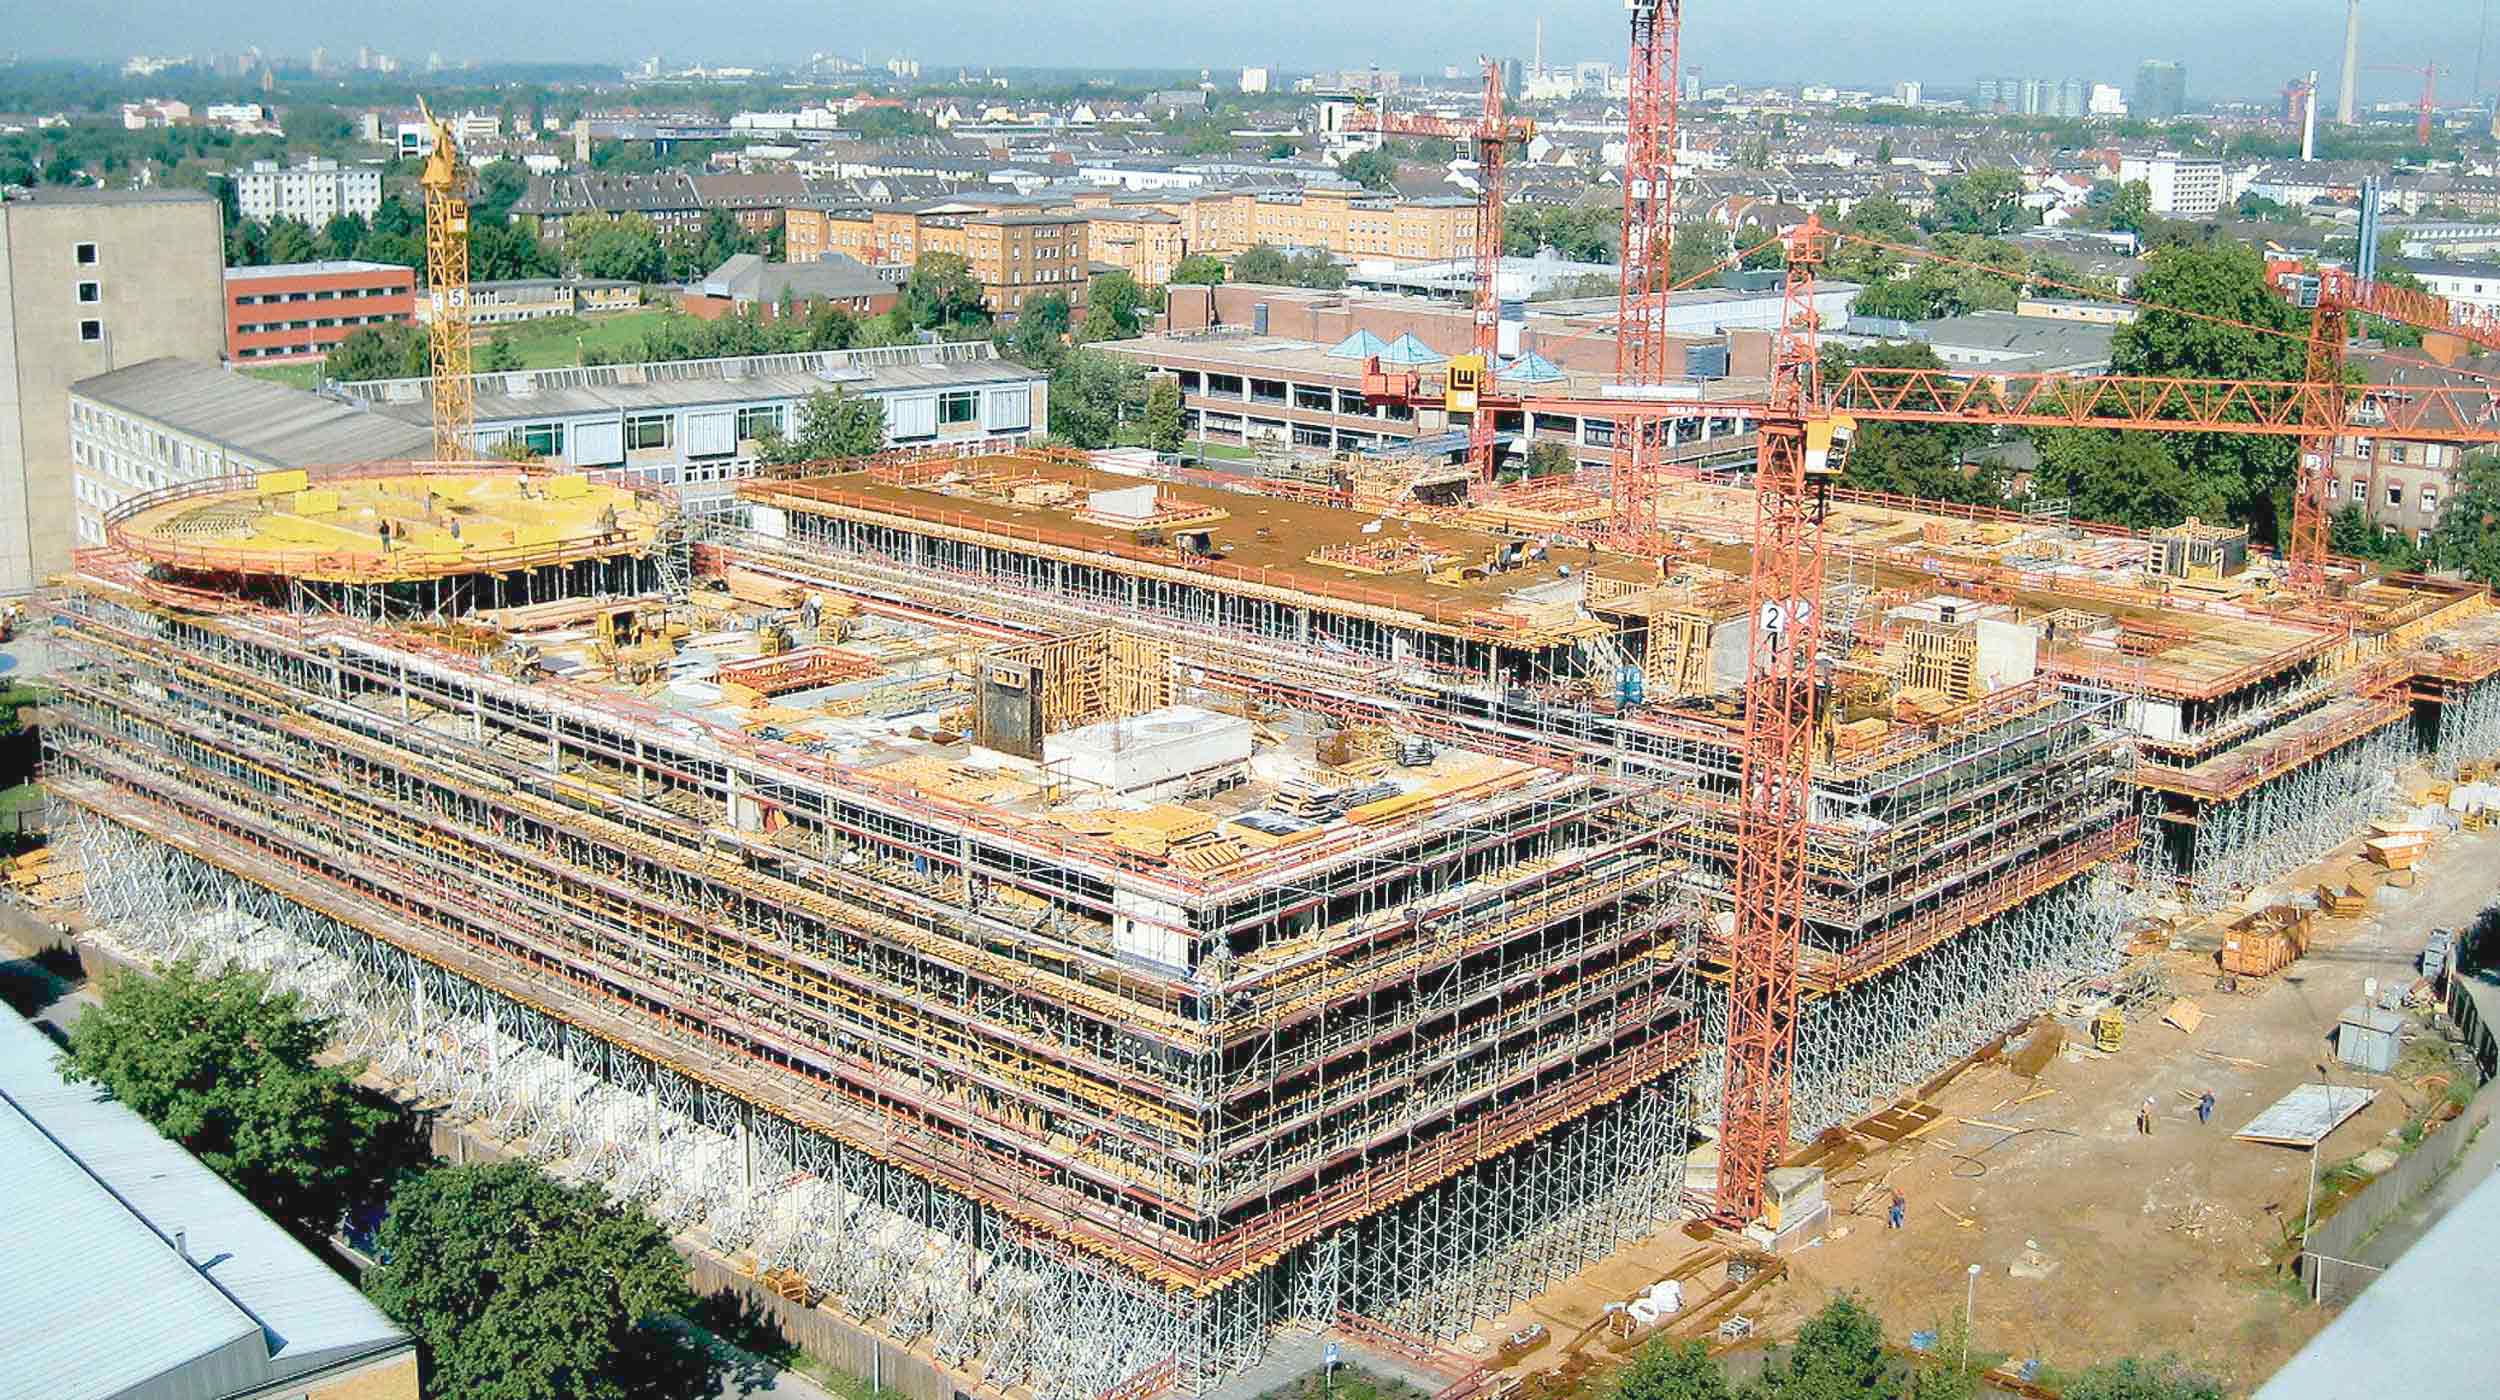 The new Medical Center II is the key for the restructuration and modernization of the University Clinic in Düsseldorf.